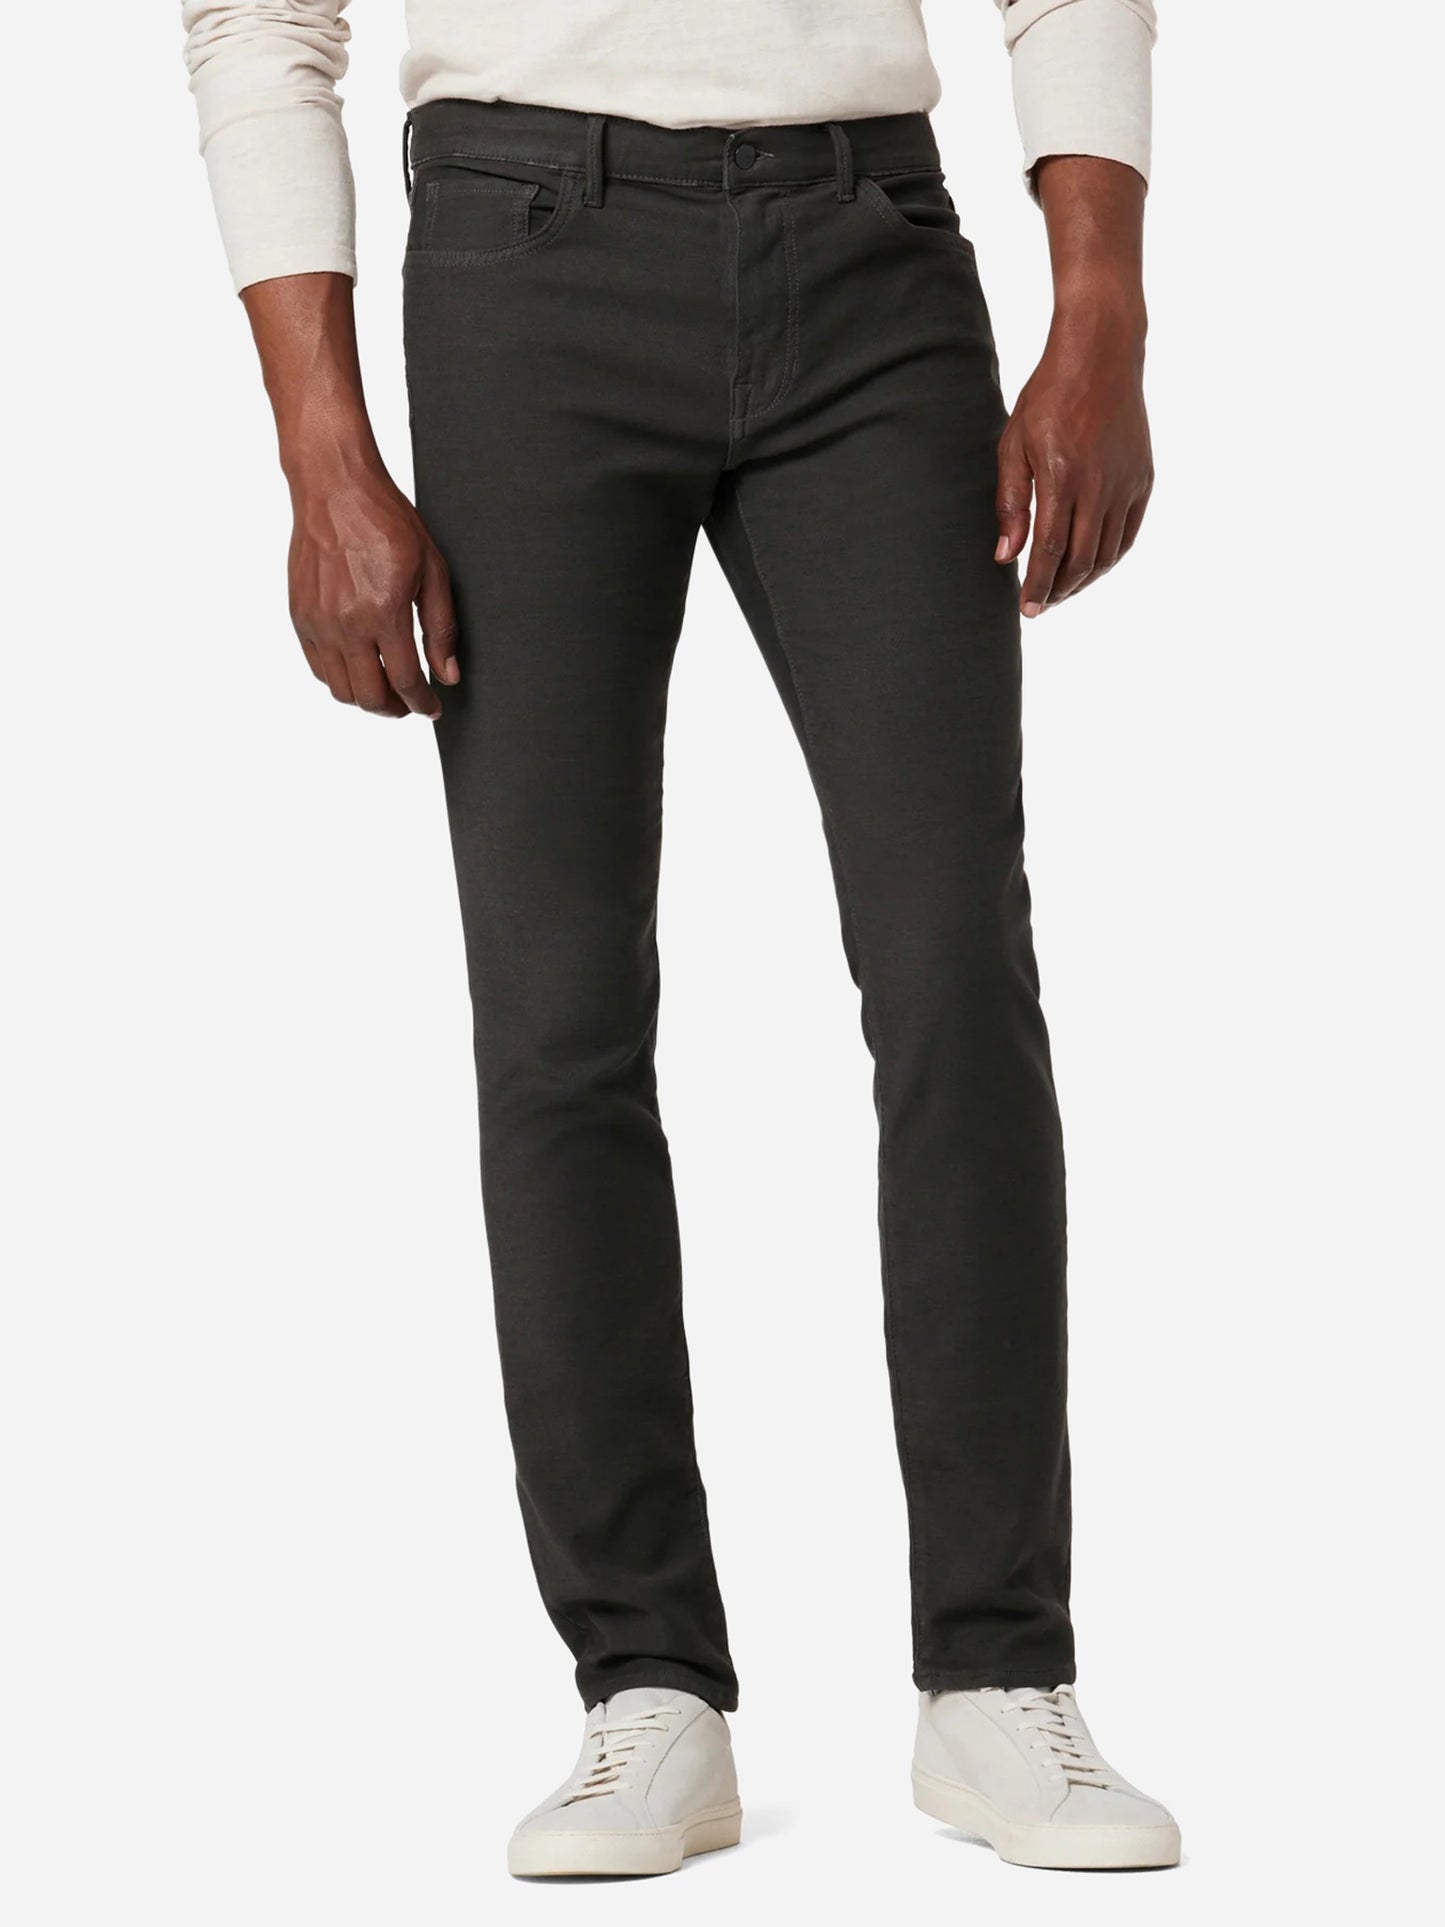 Joes Men's The Airsoft Asher Jean